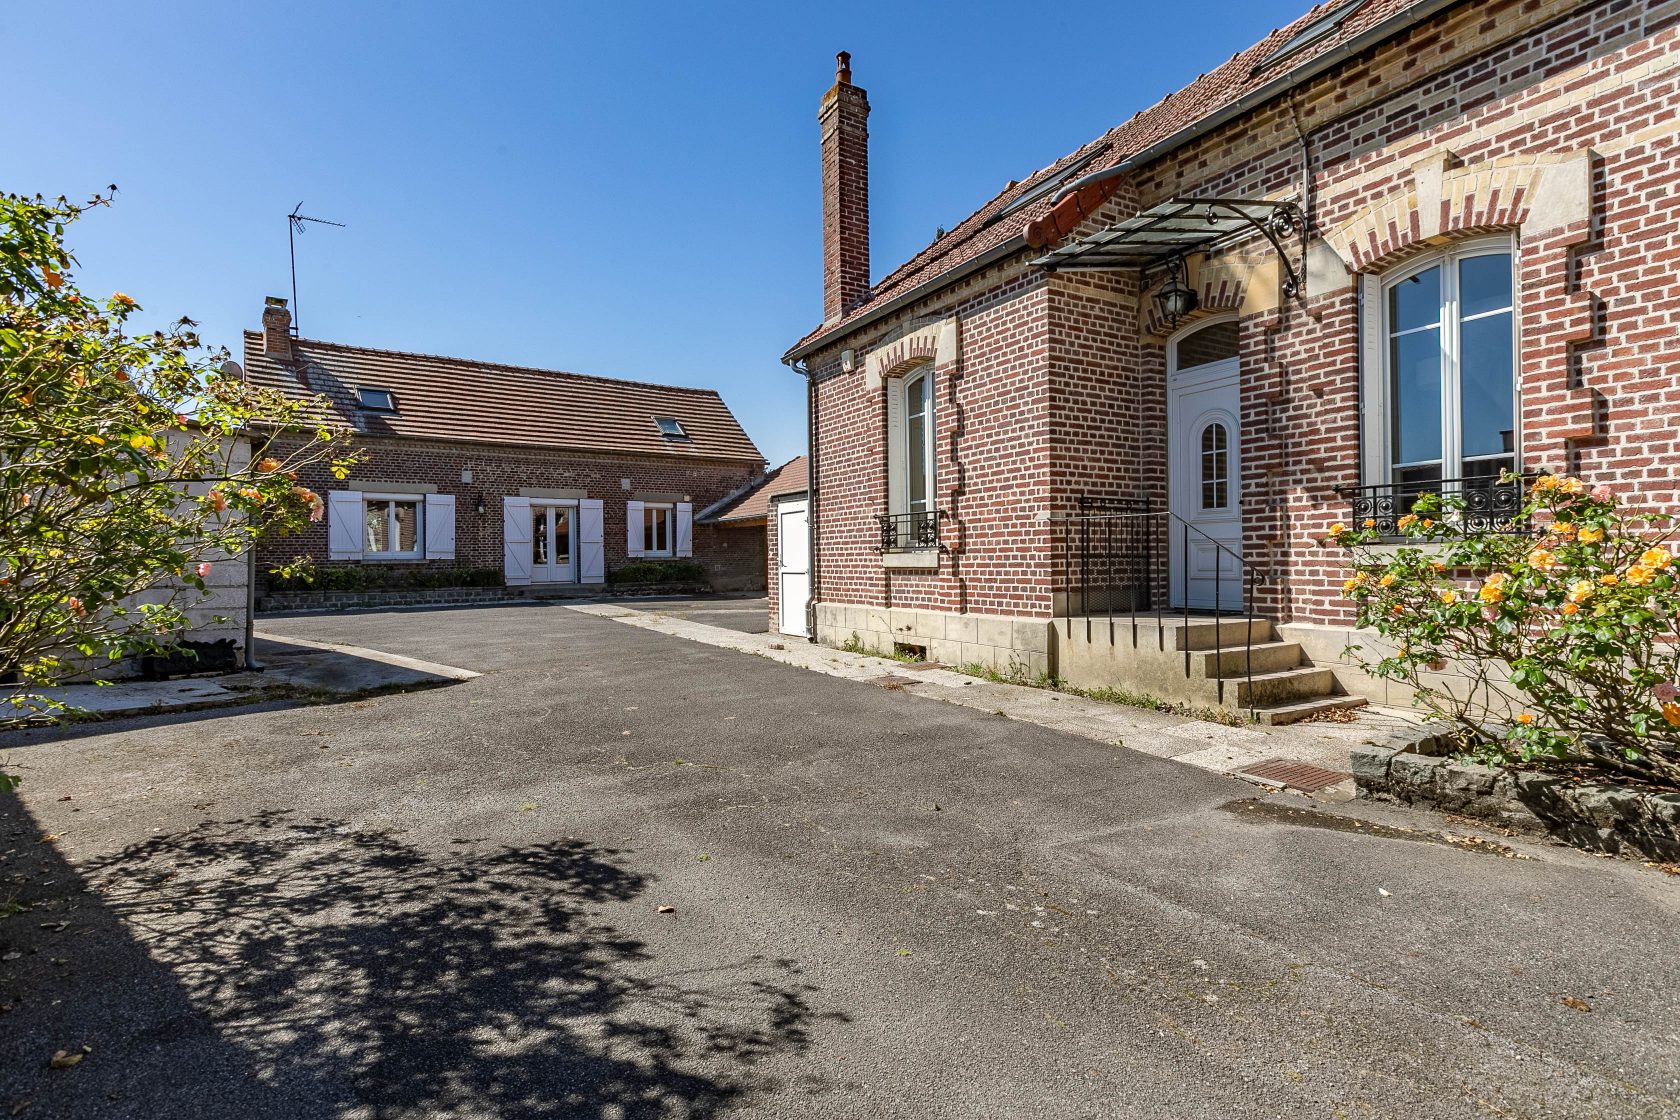 2 in 1 – Charming fully renovated farmhouse and its converted outbuilding